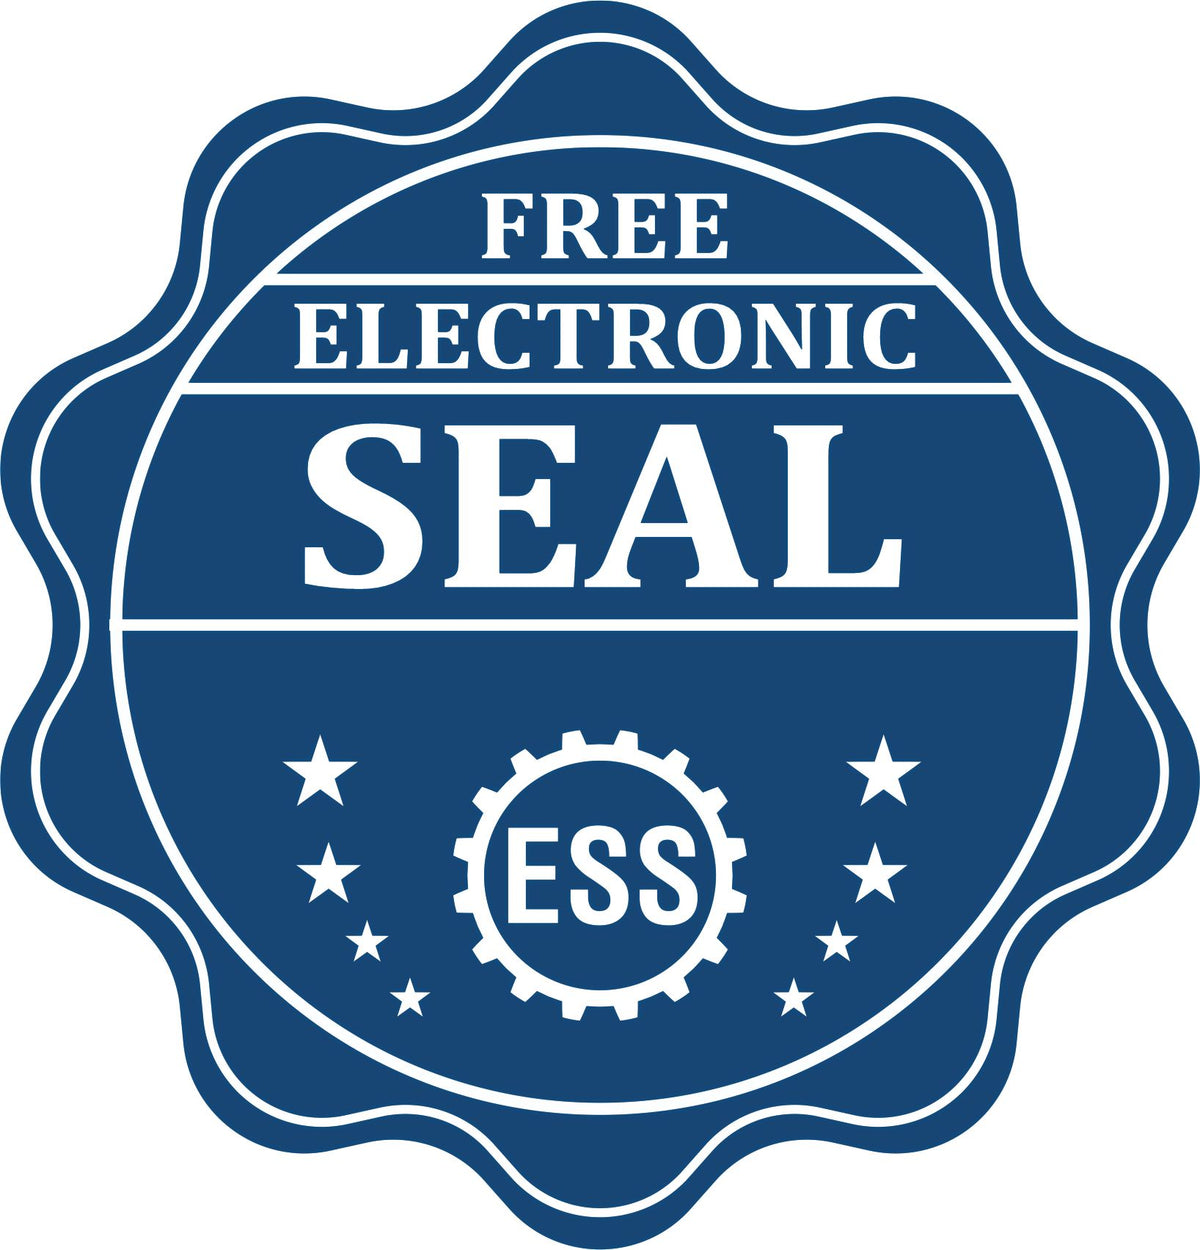 A badge showing a free electronic seal for the Slim Pre-Inked Rectangular Notary Stamp for Guam with stars and the ESS gear on the emblem.